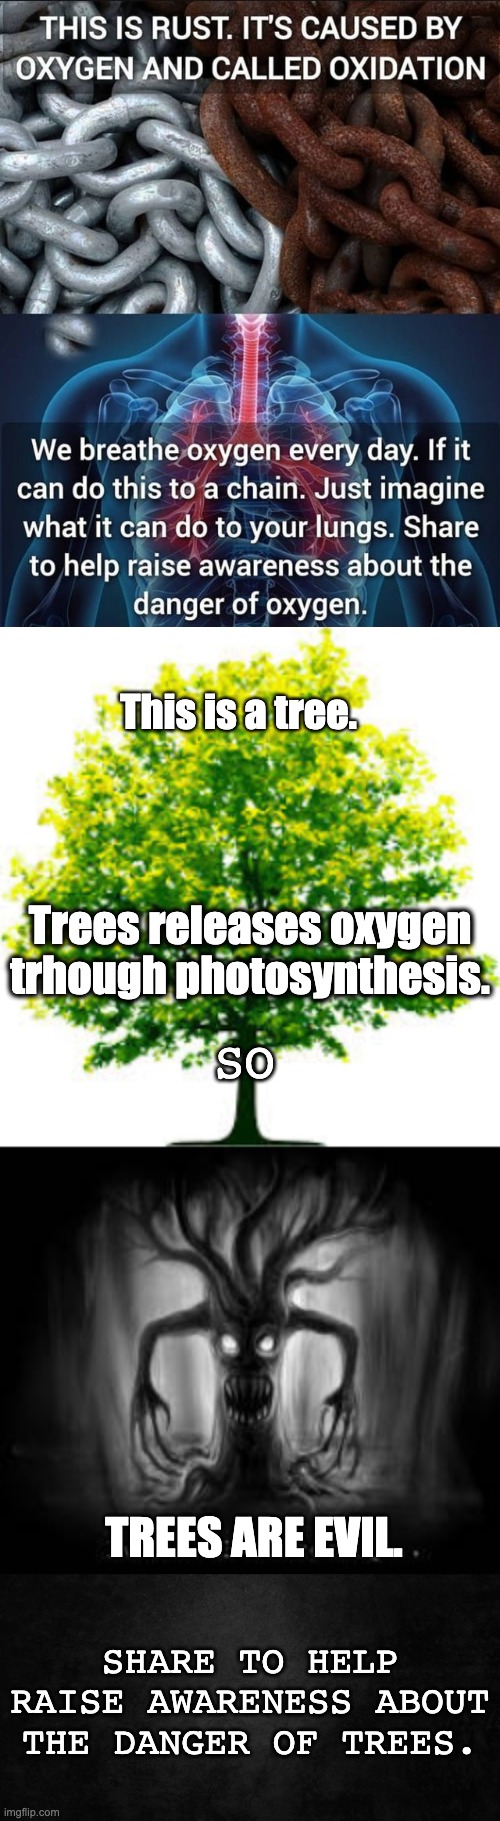 Trees are evil. | This is a tree. Trees releases oxygen trhough photosynthesis. SO; TREES ARE EVIL. SHARE TO HELP RAISE AWARENESS ABOUT THE DANGER OF TREES. | image tagged in memes,oxygen,trees,evil | made w/ Imgflip meme maker